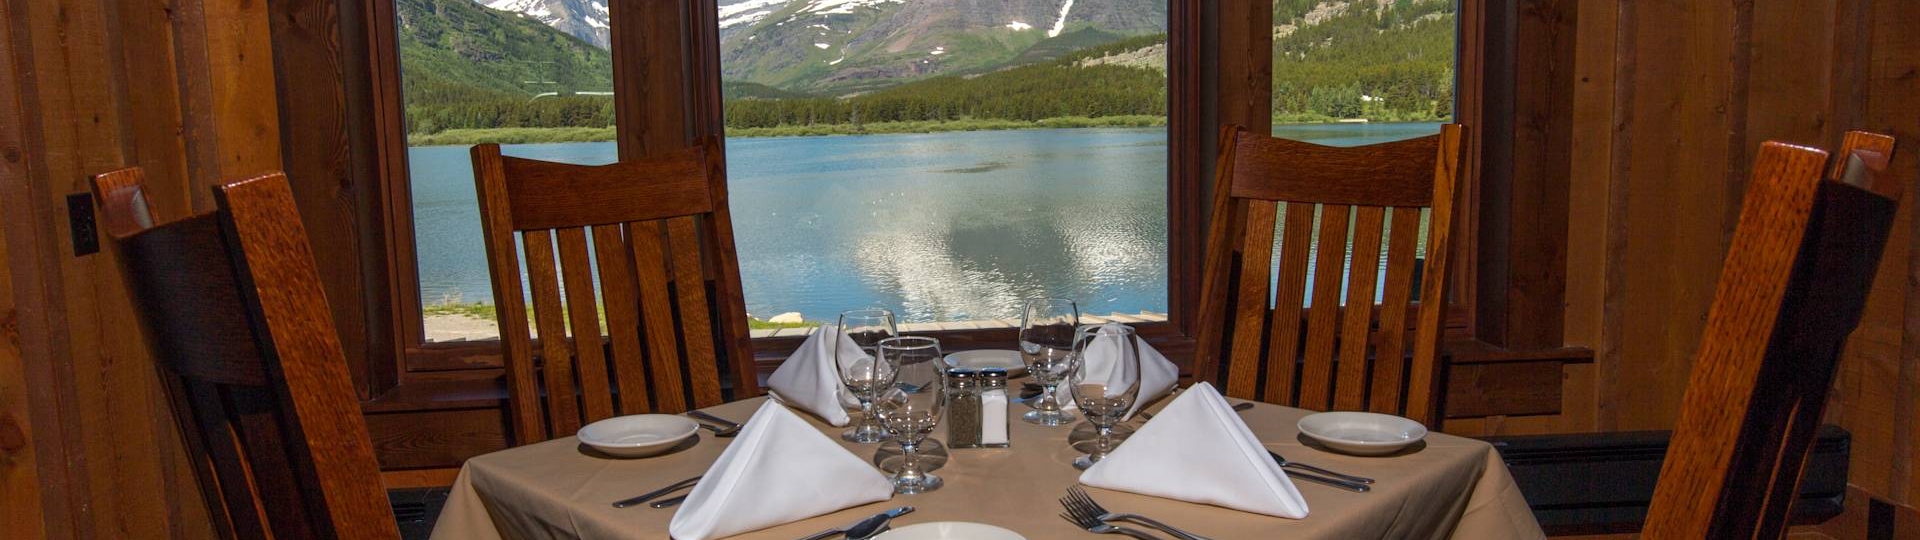 Canyon Lodge Dining Room - Yellowstone Dining